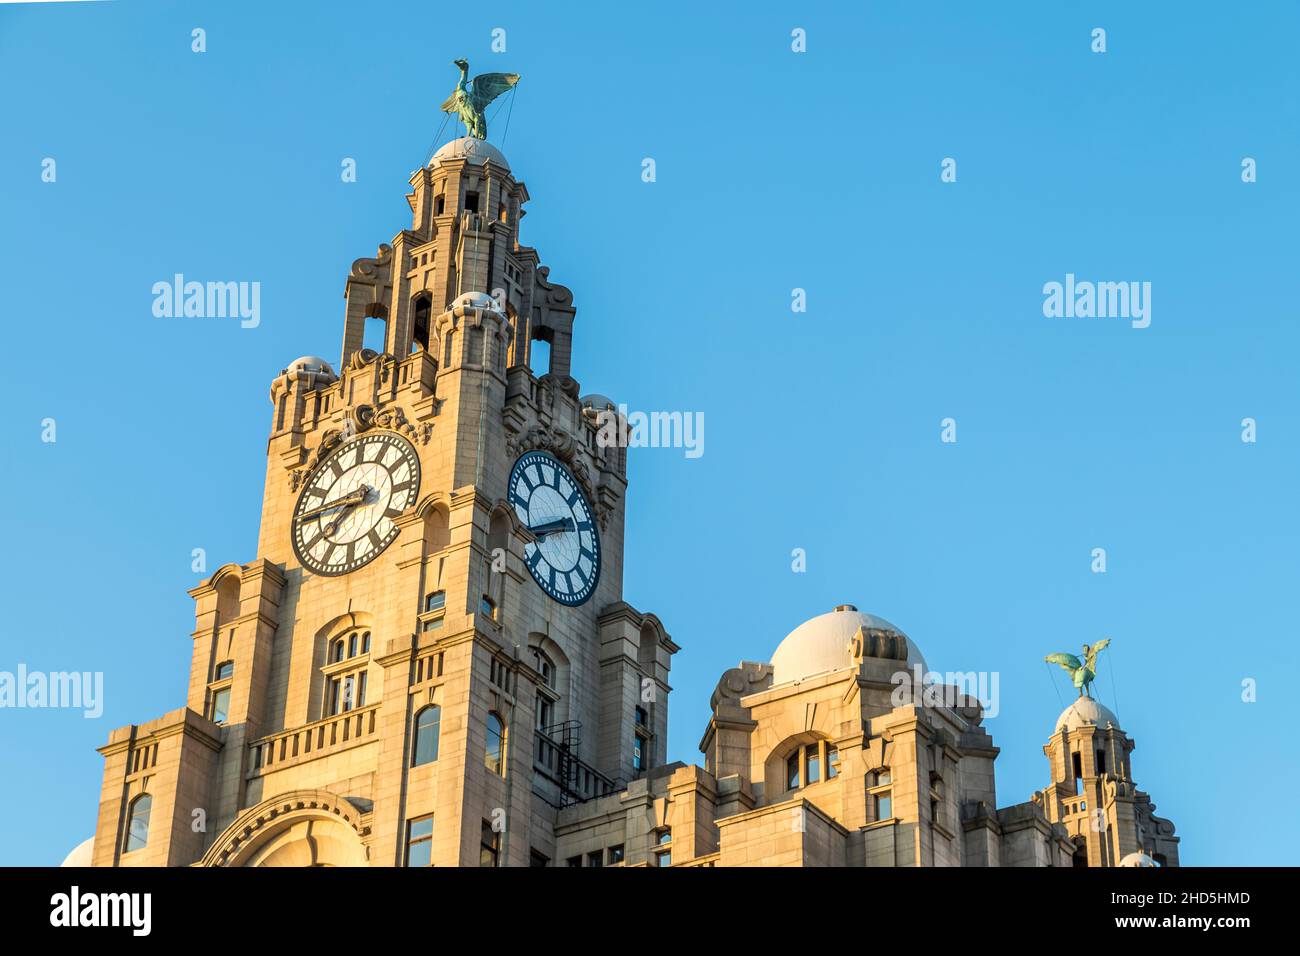 The two Liver birds perched on the Royal Liver Building on the Liverpool skyline at sunset. Stock Photo